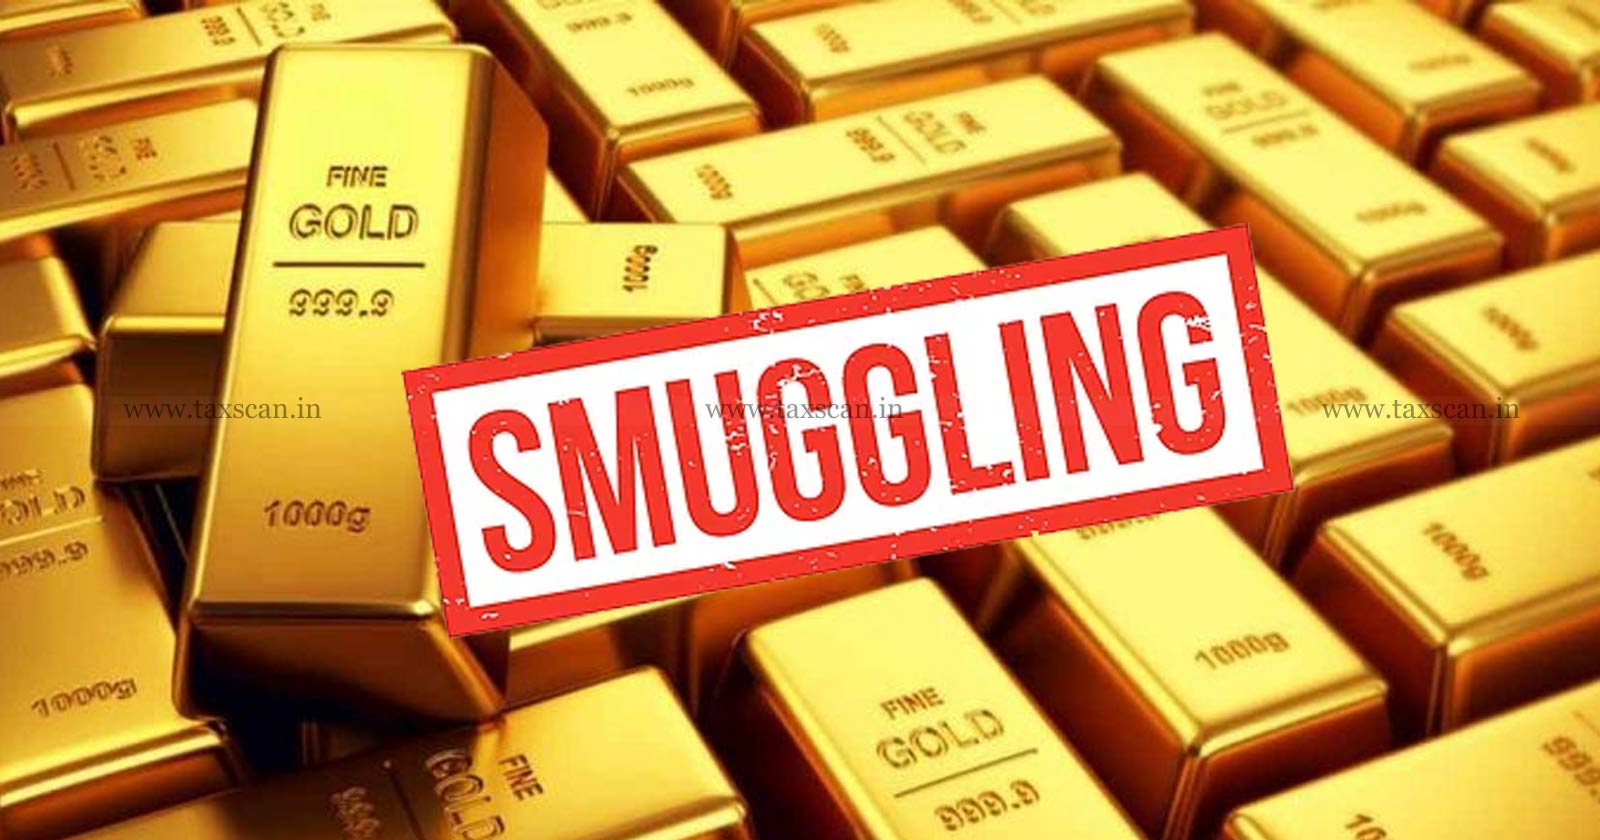 Delhi High Court - Customs Act - Smuggling gold penalties upheld - Smuggling gold - taxscan